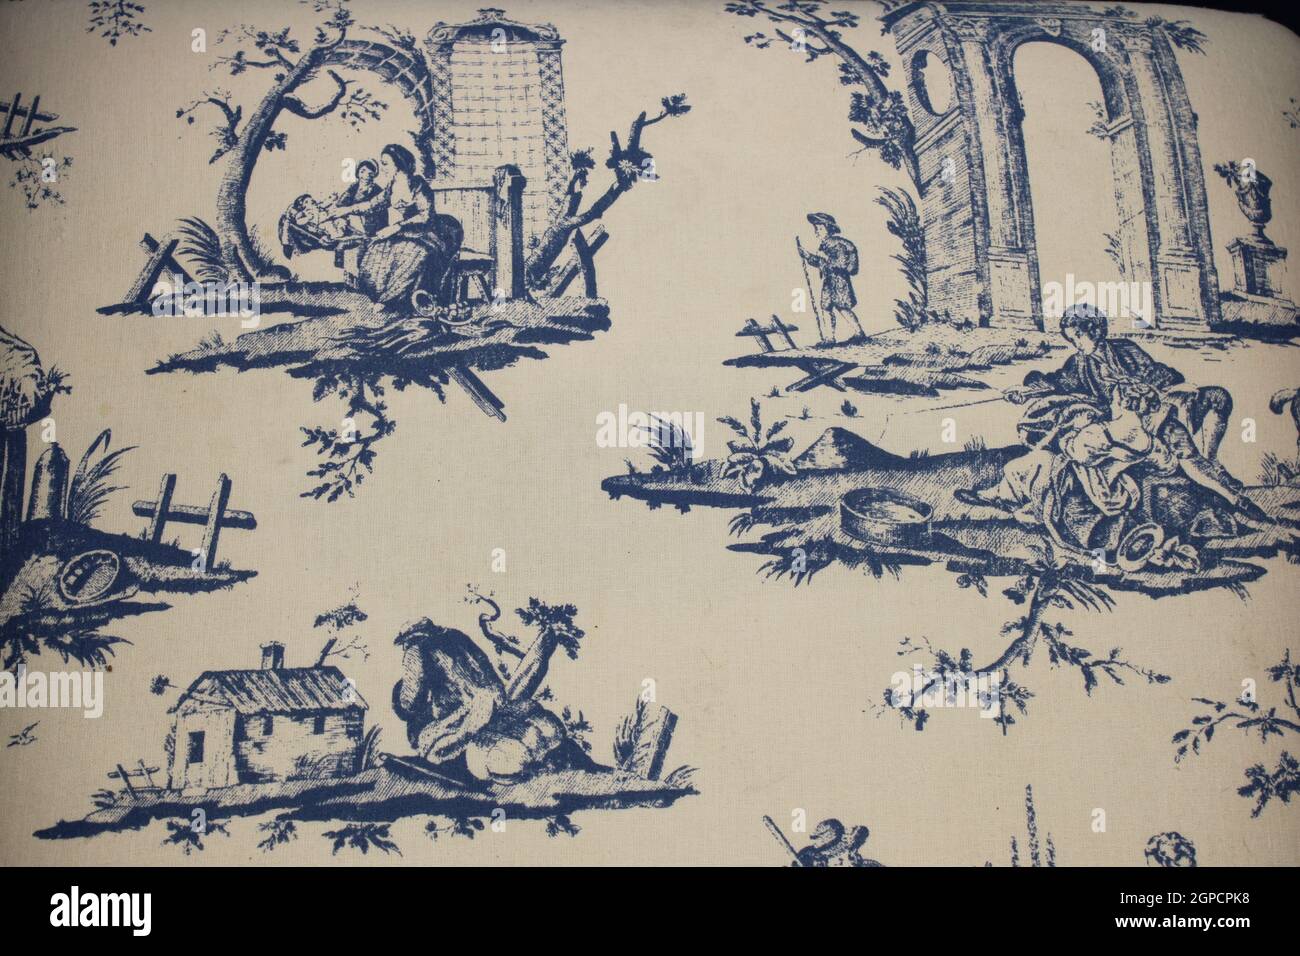 Vintage French Toile Linen Fabric in blue and white with a victorian feel Stock Photo